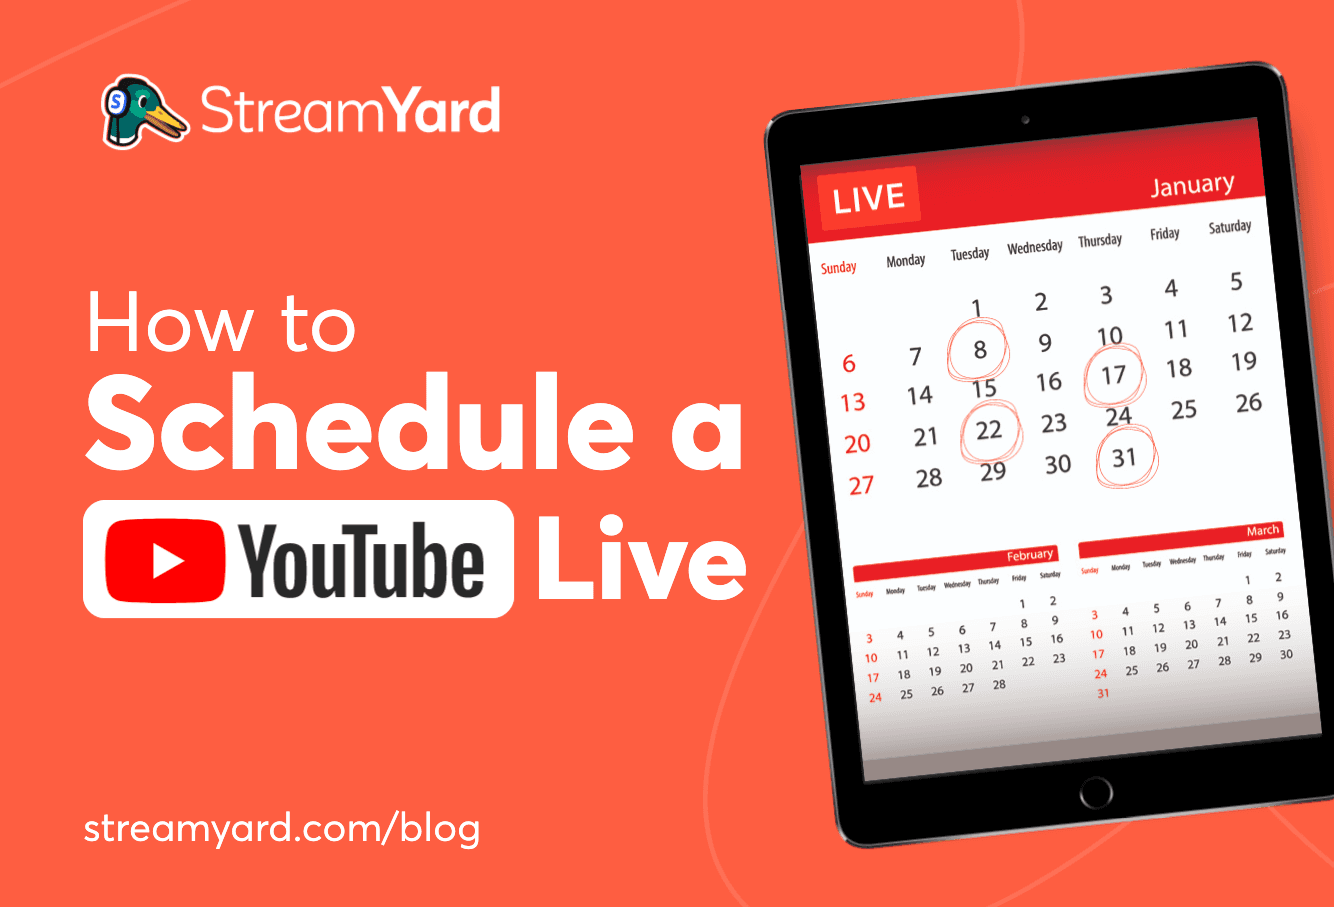 Learn how to schedule a YouTube Live on StreamYard in a few simple steps.